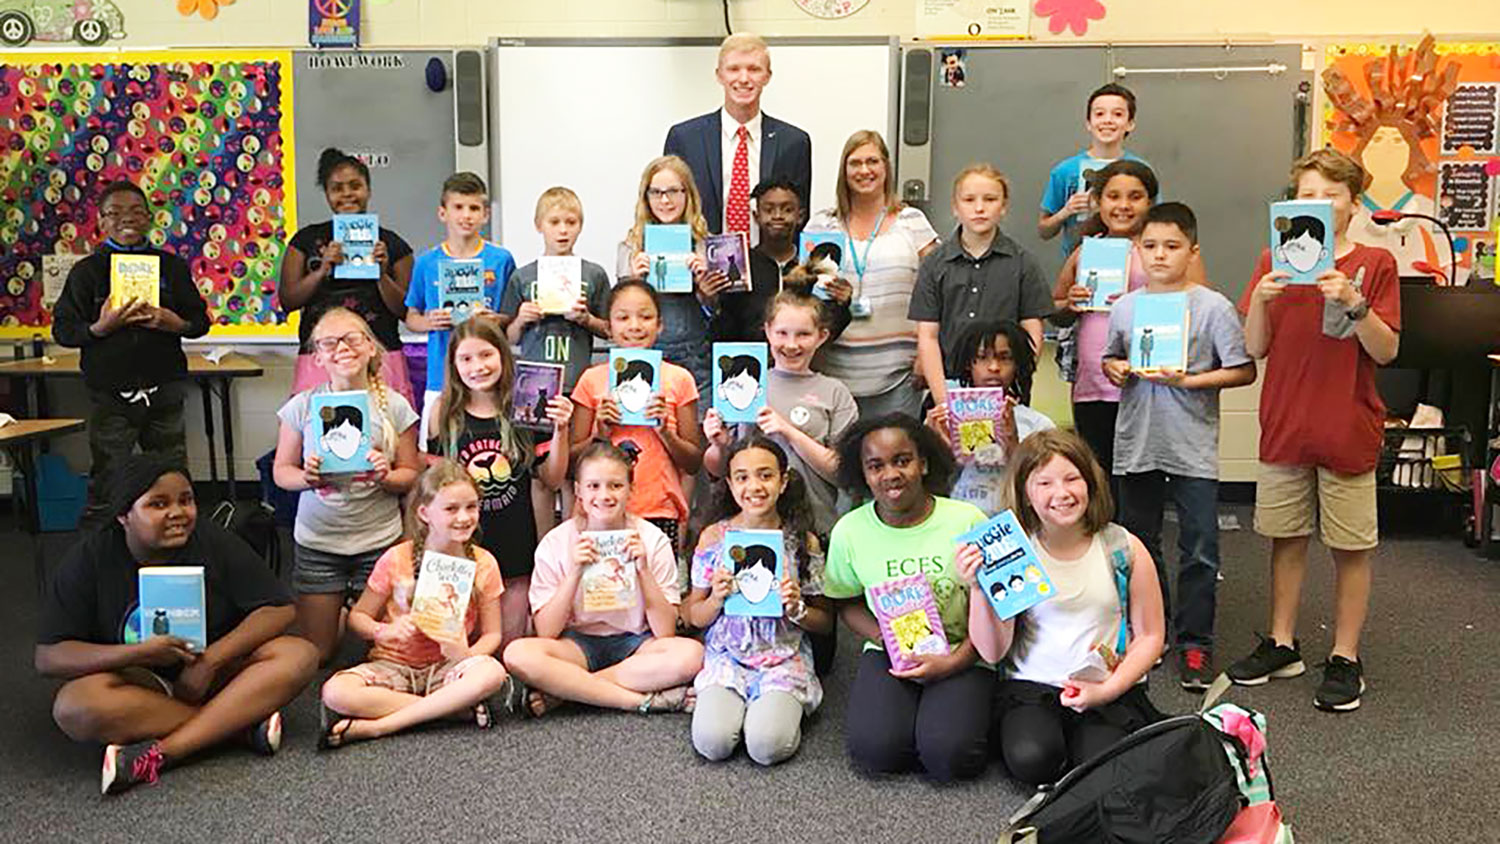 Class of elementary school students holding up books